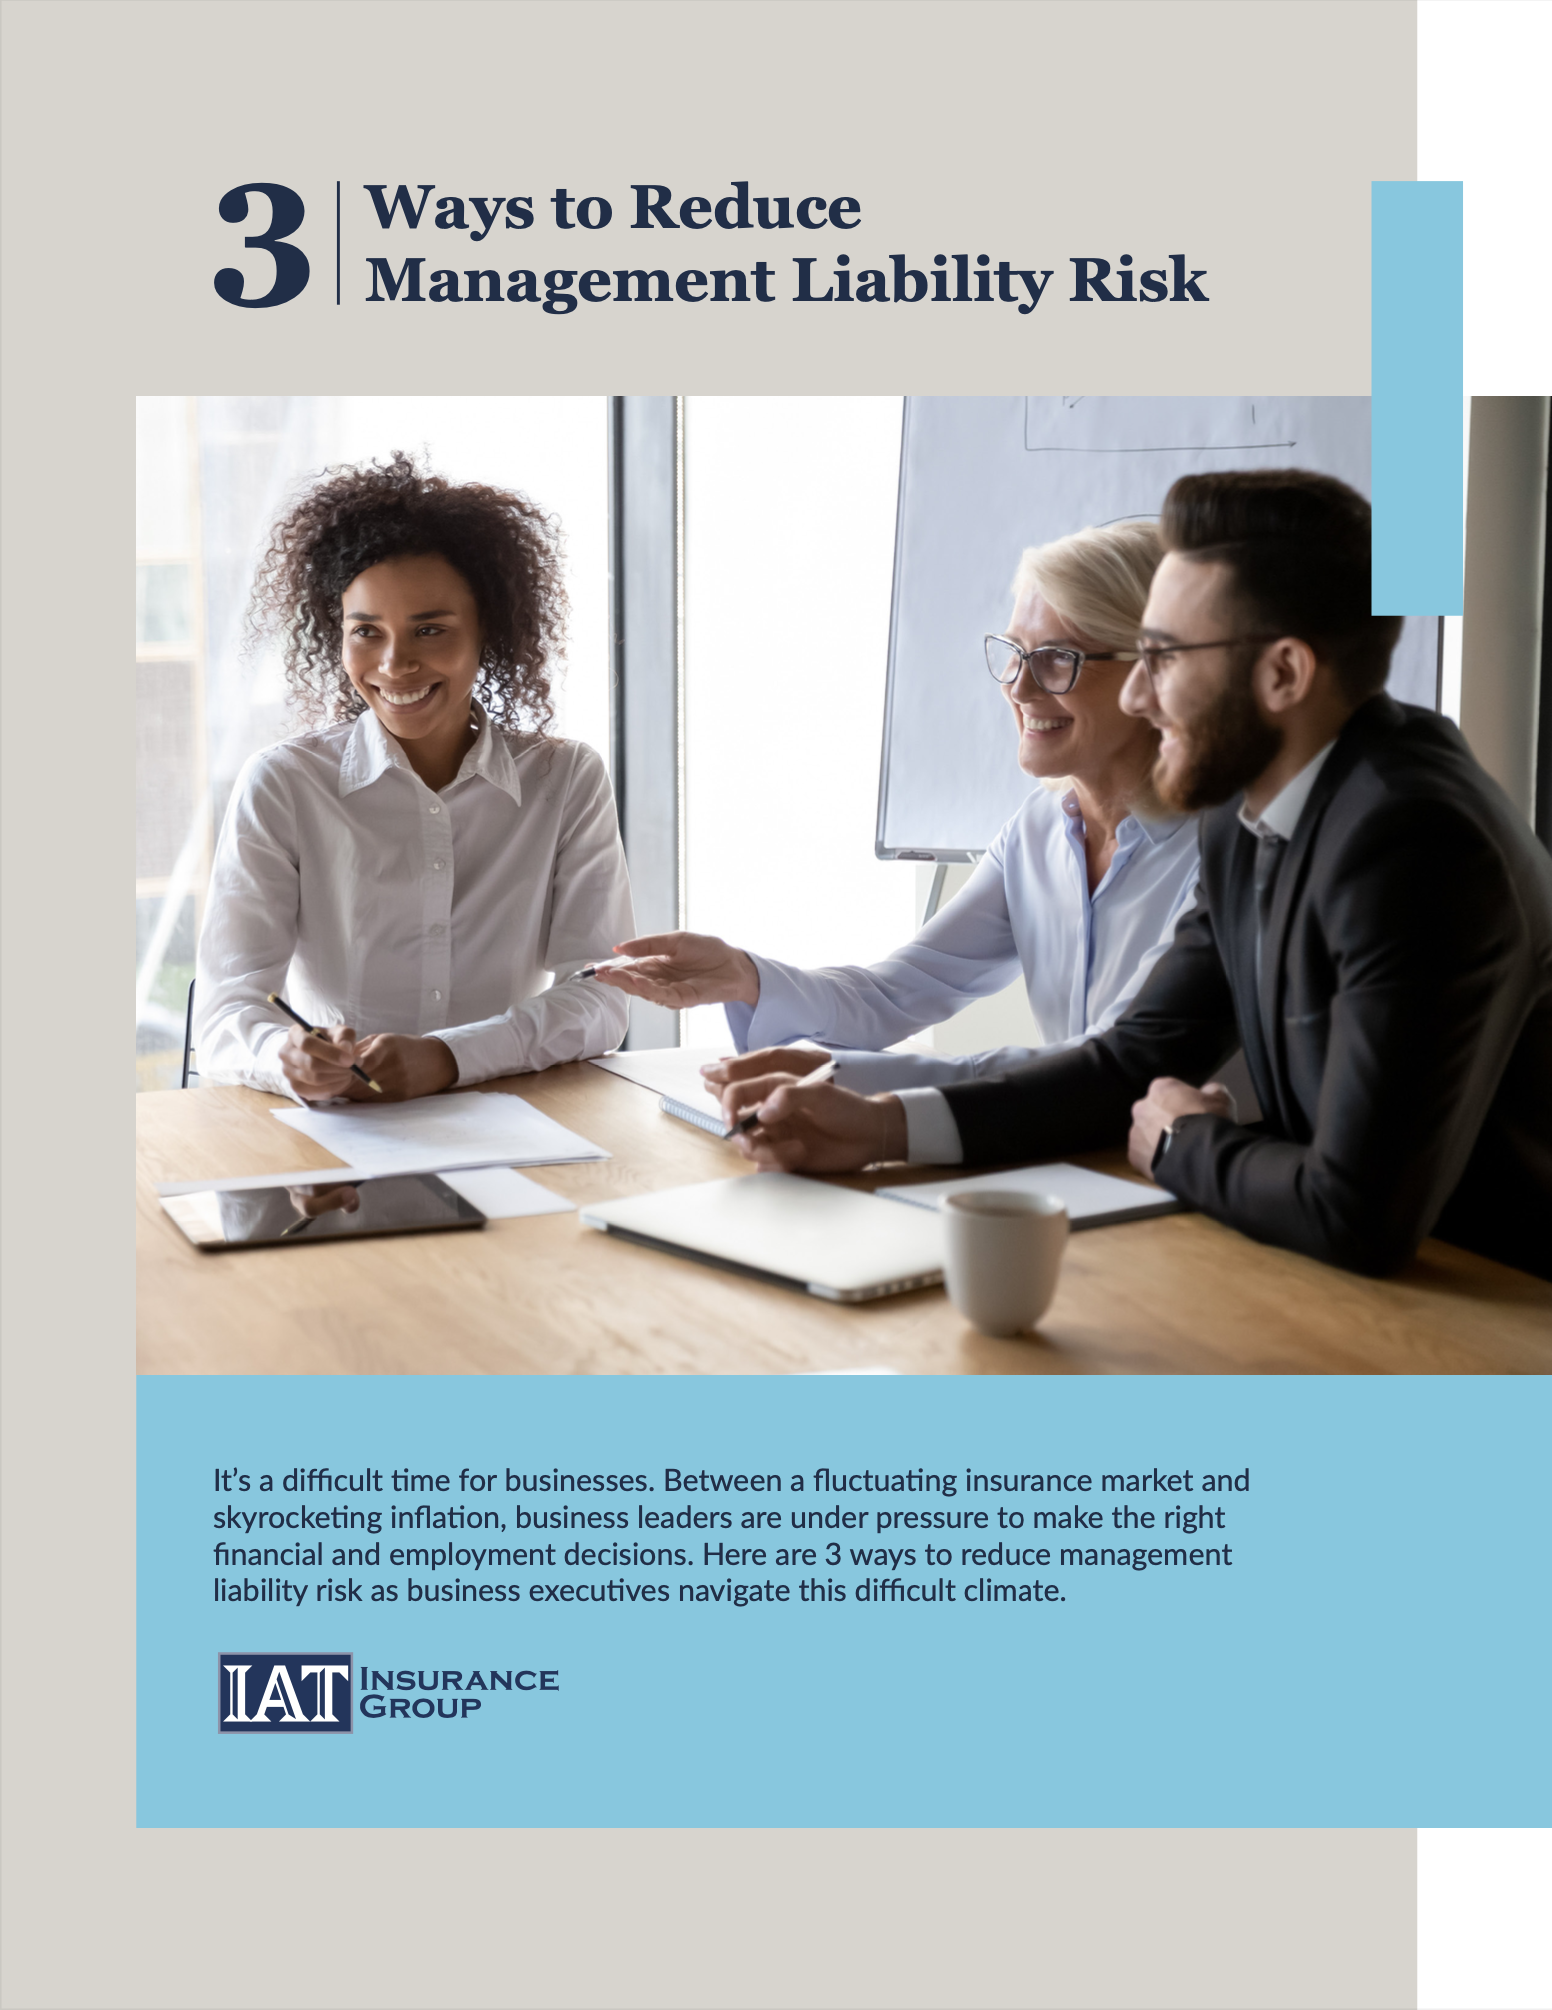 3 Ways to Reduce Management Liability Risk